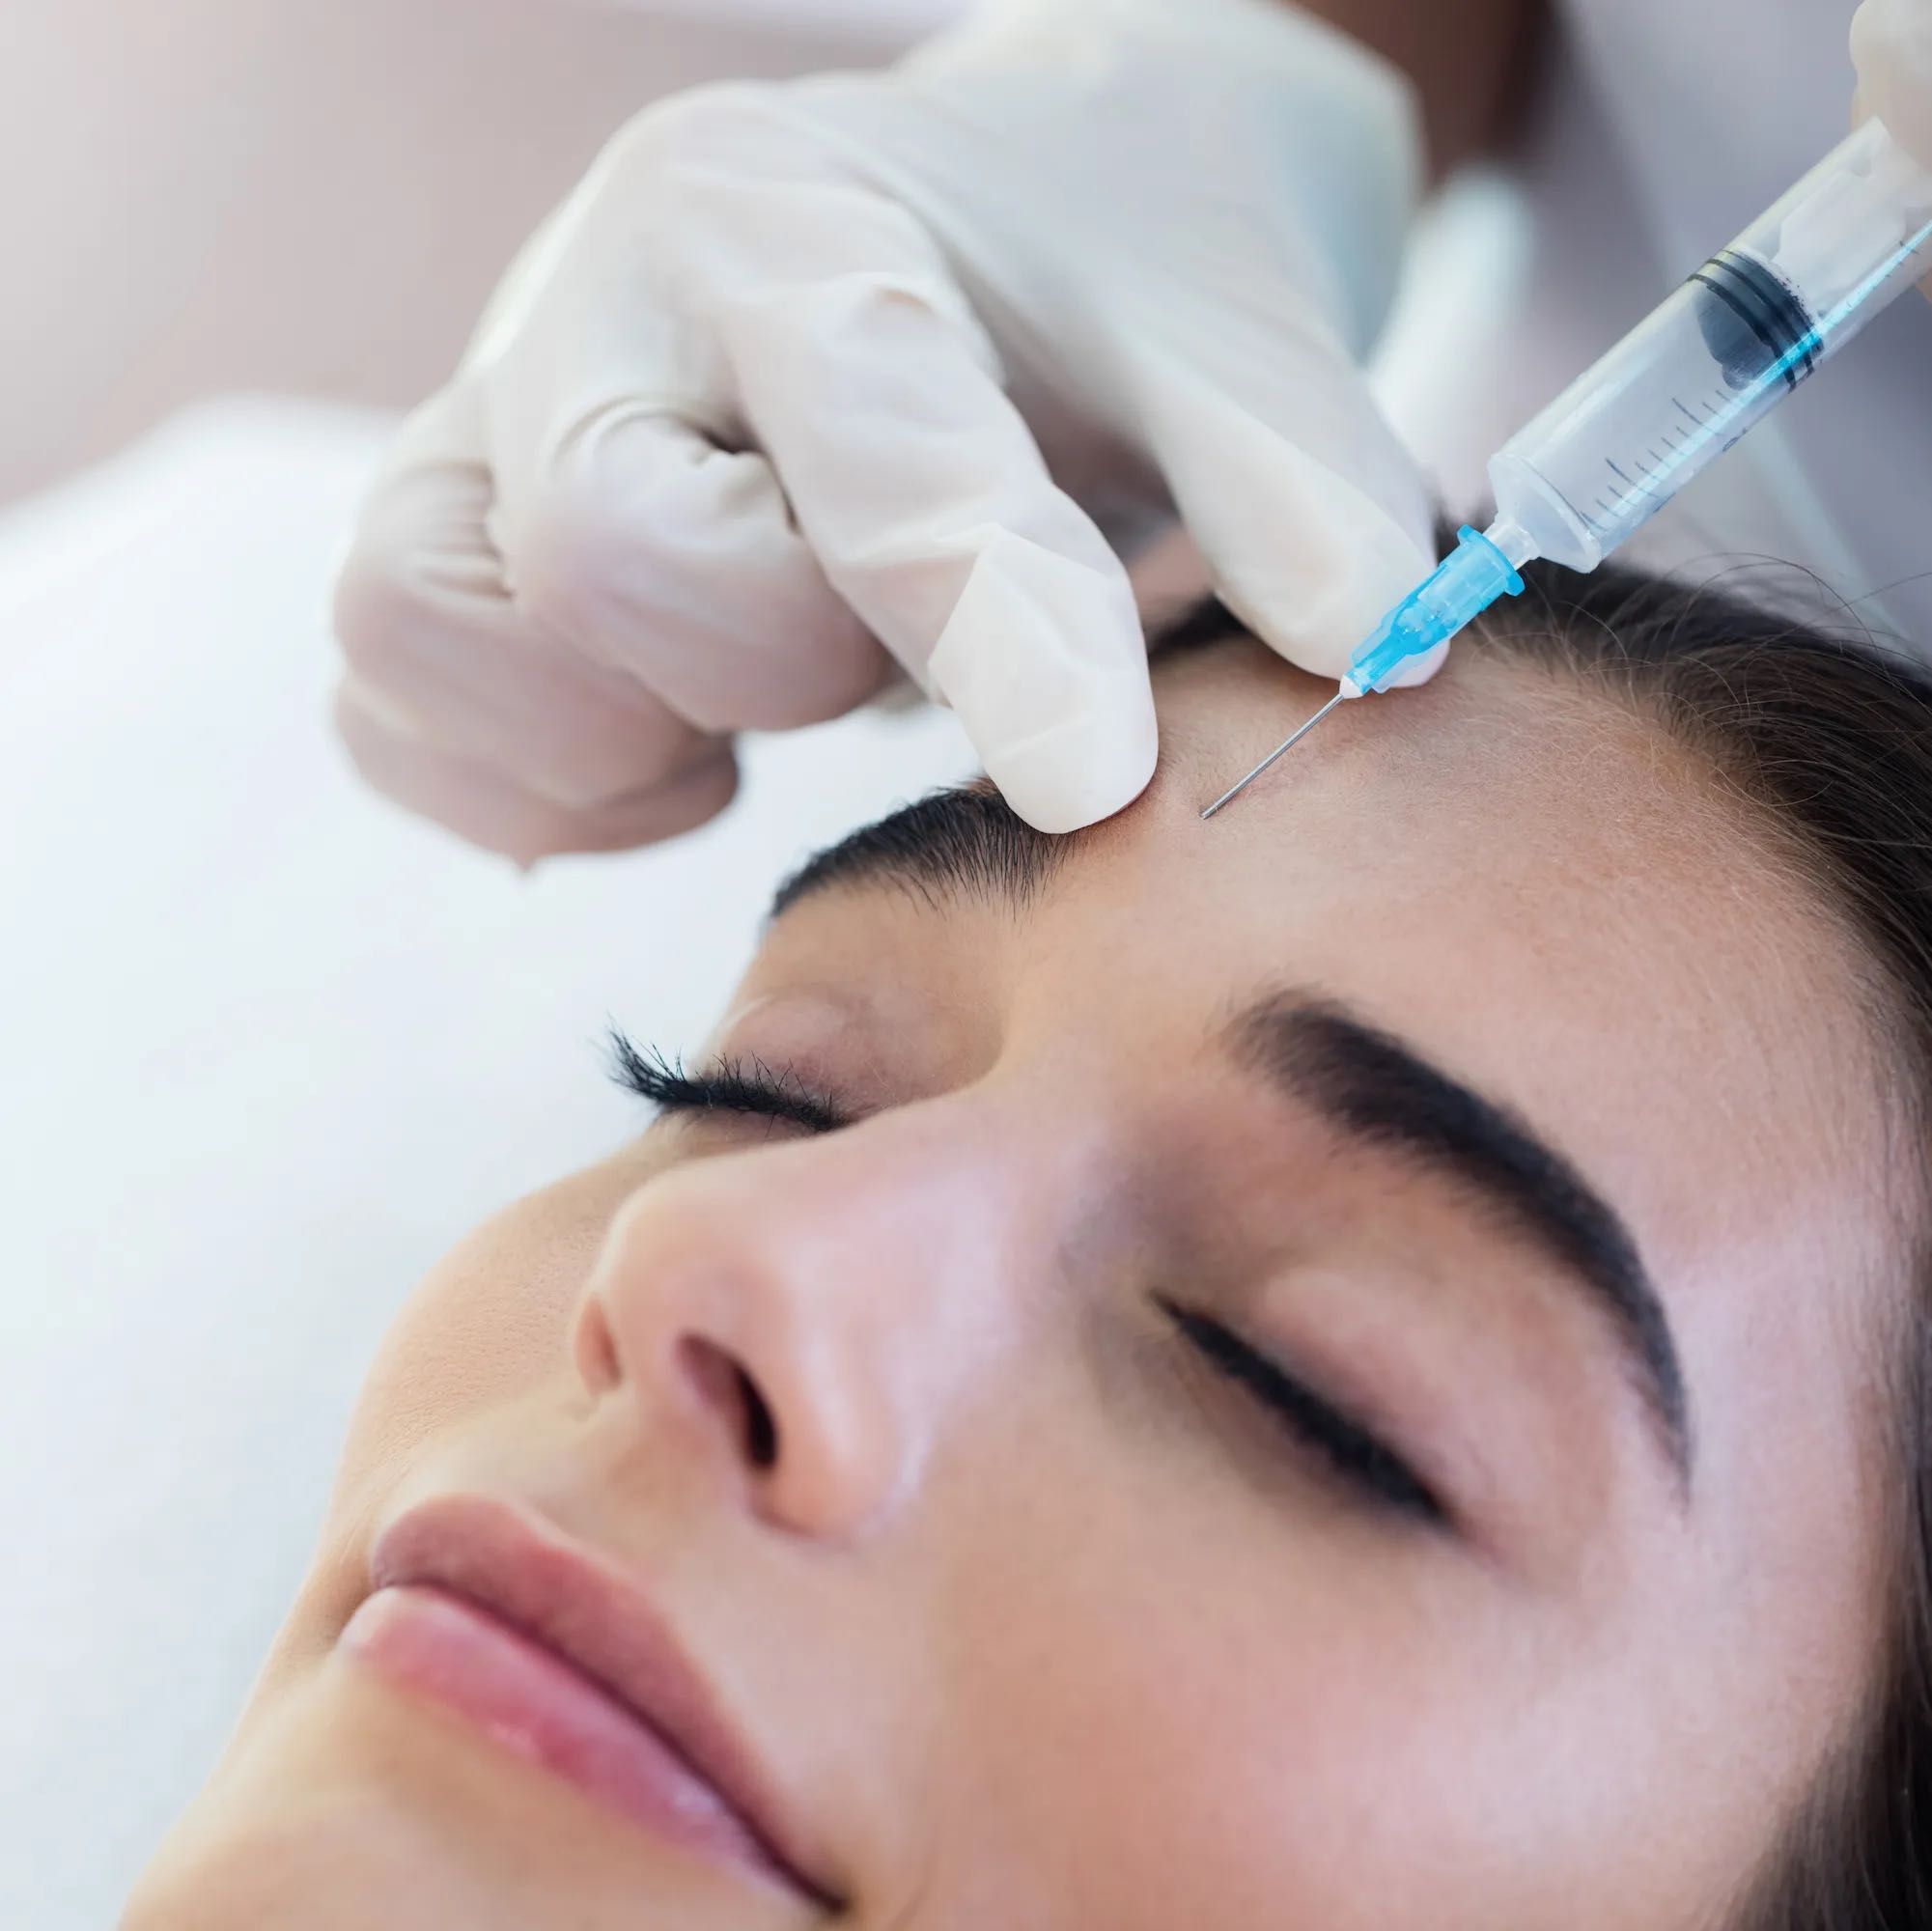 Top up -Botox latest 2 wks after initial treatment portfolio